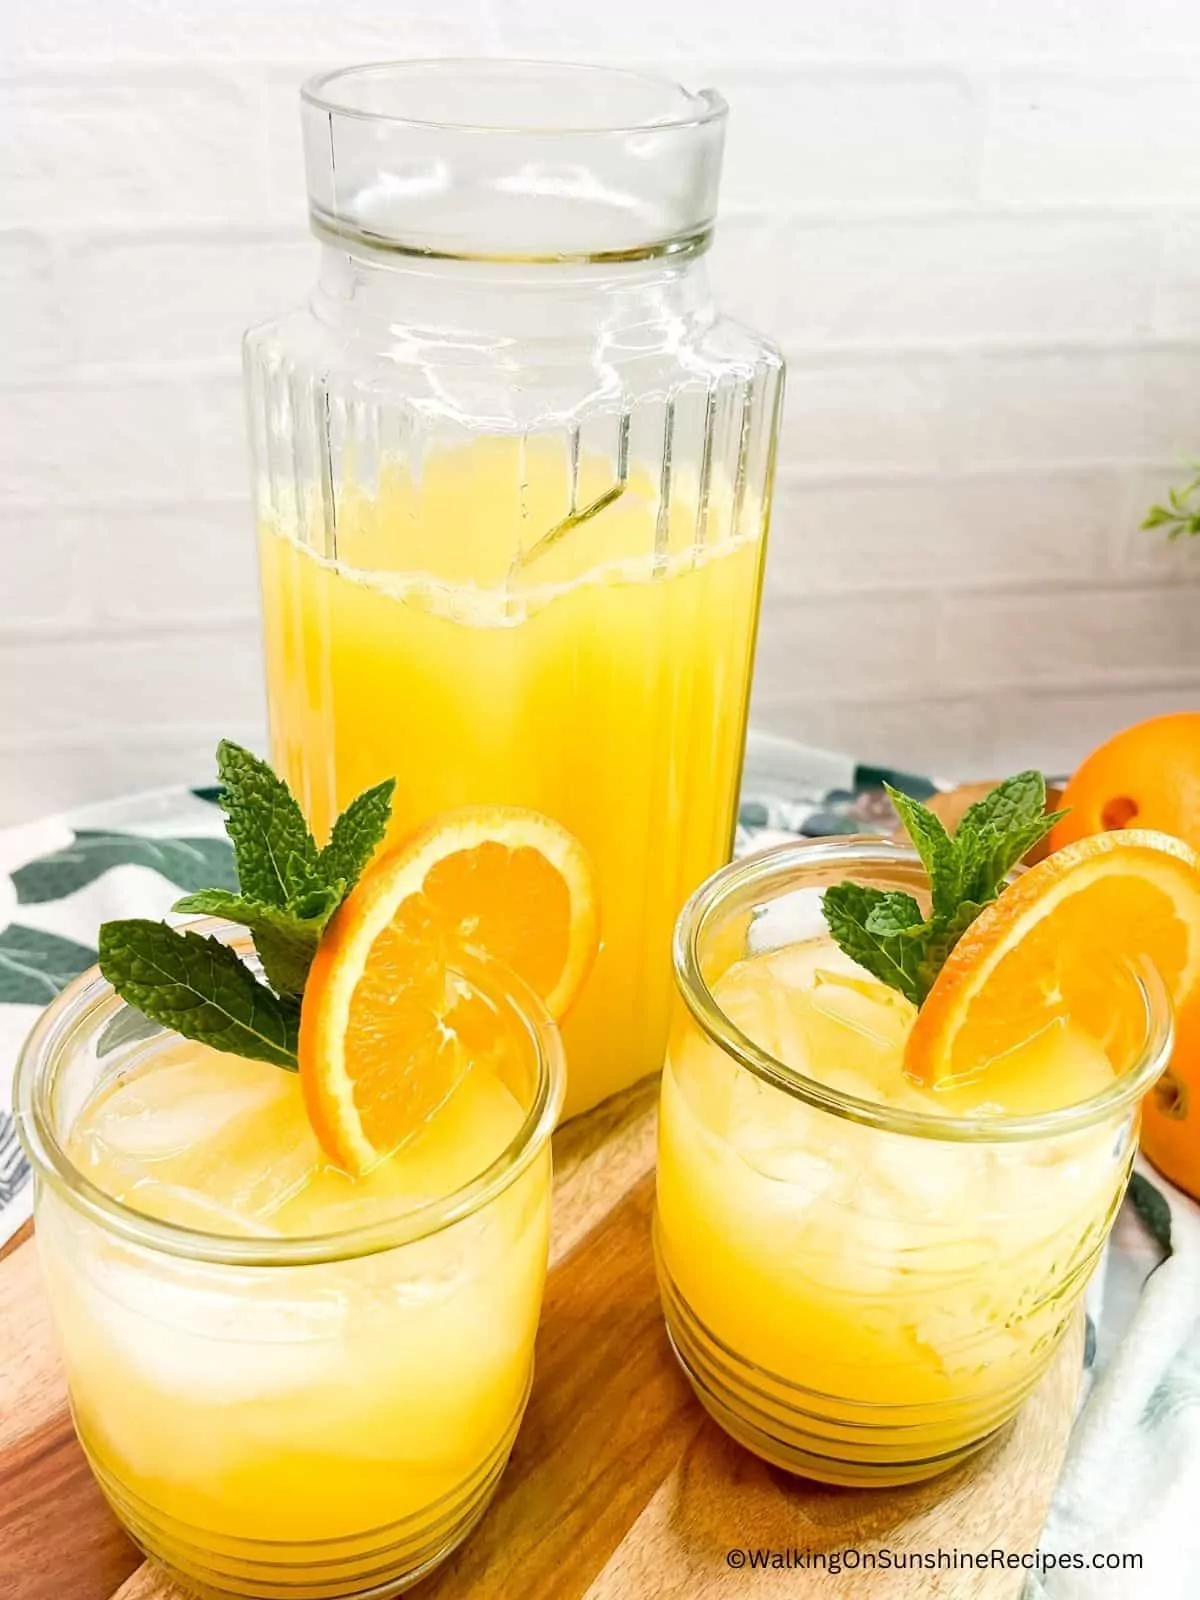 pineapple punch served in two glasses with sprig of mint and orange slices.